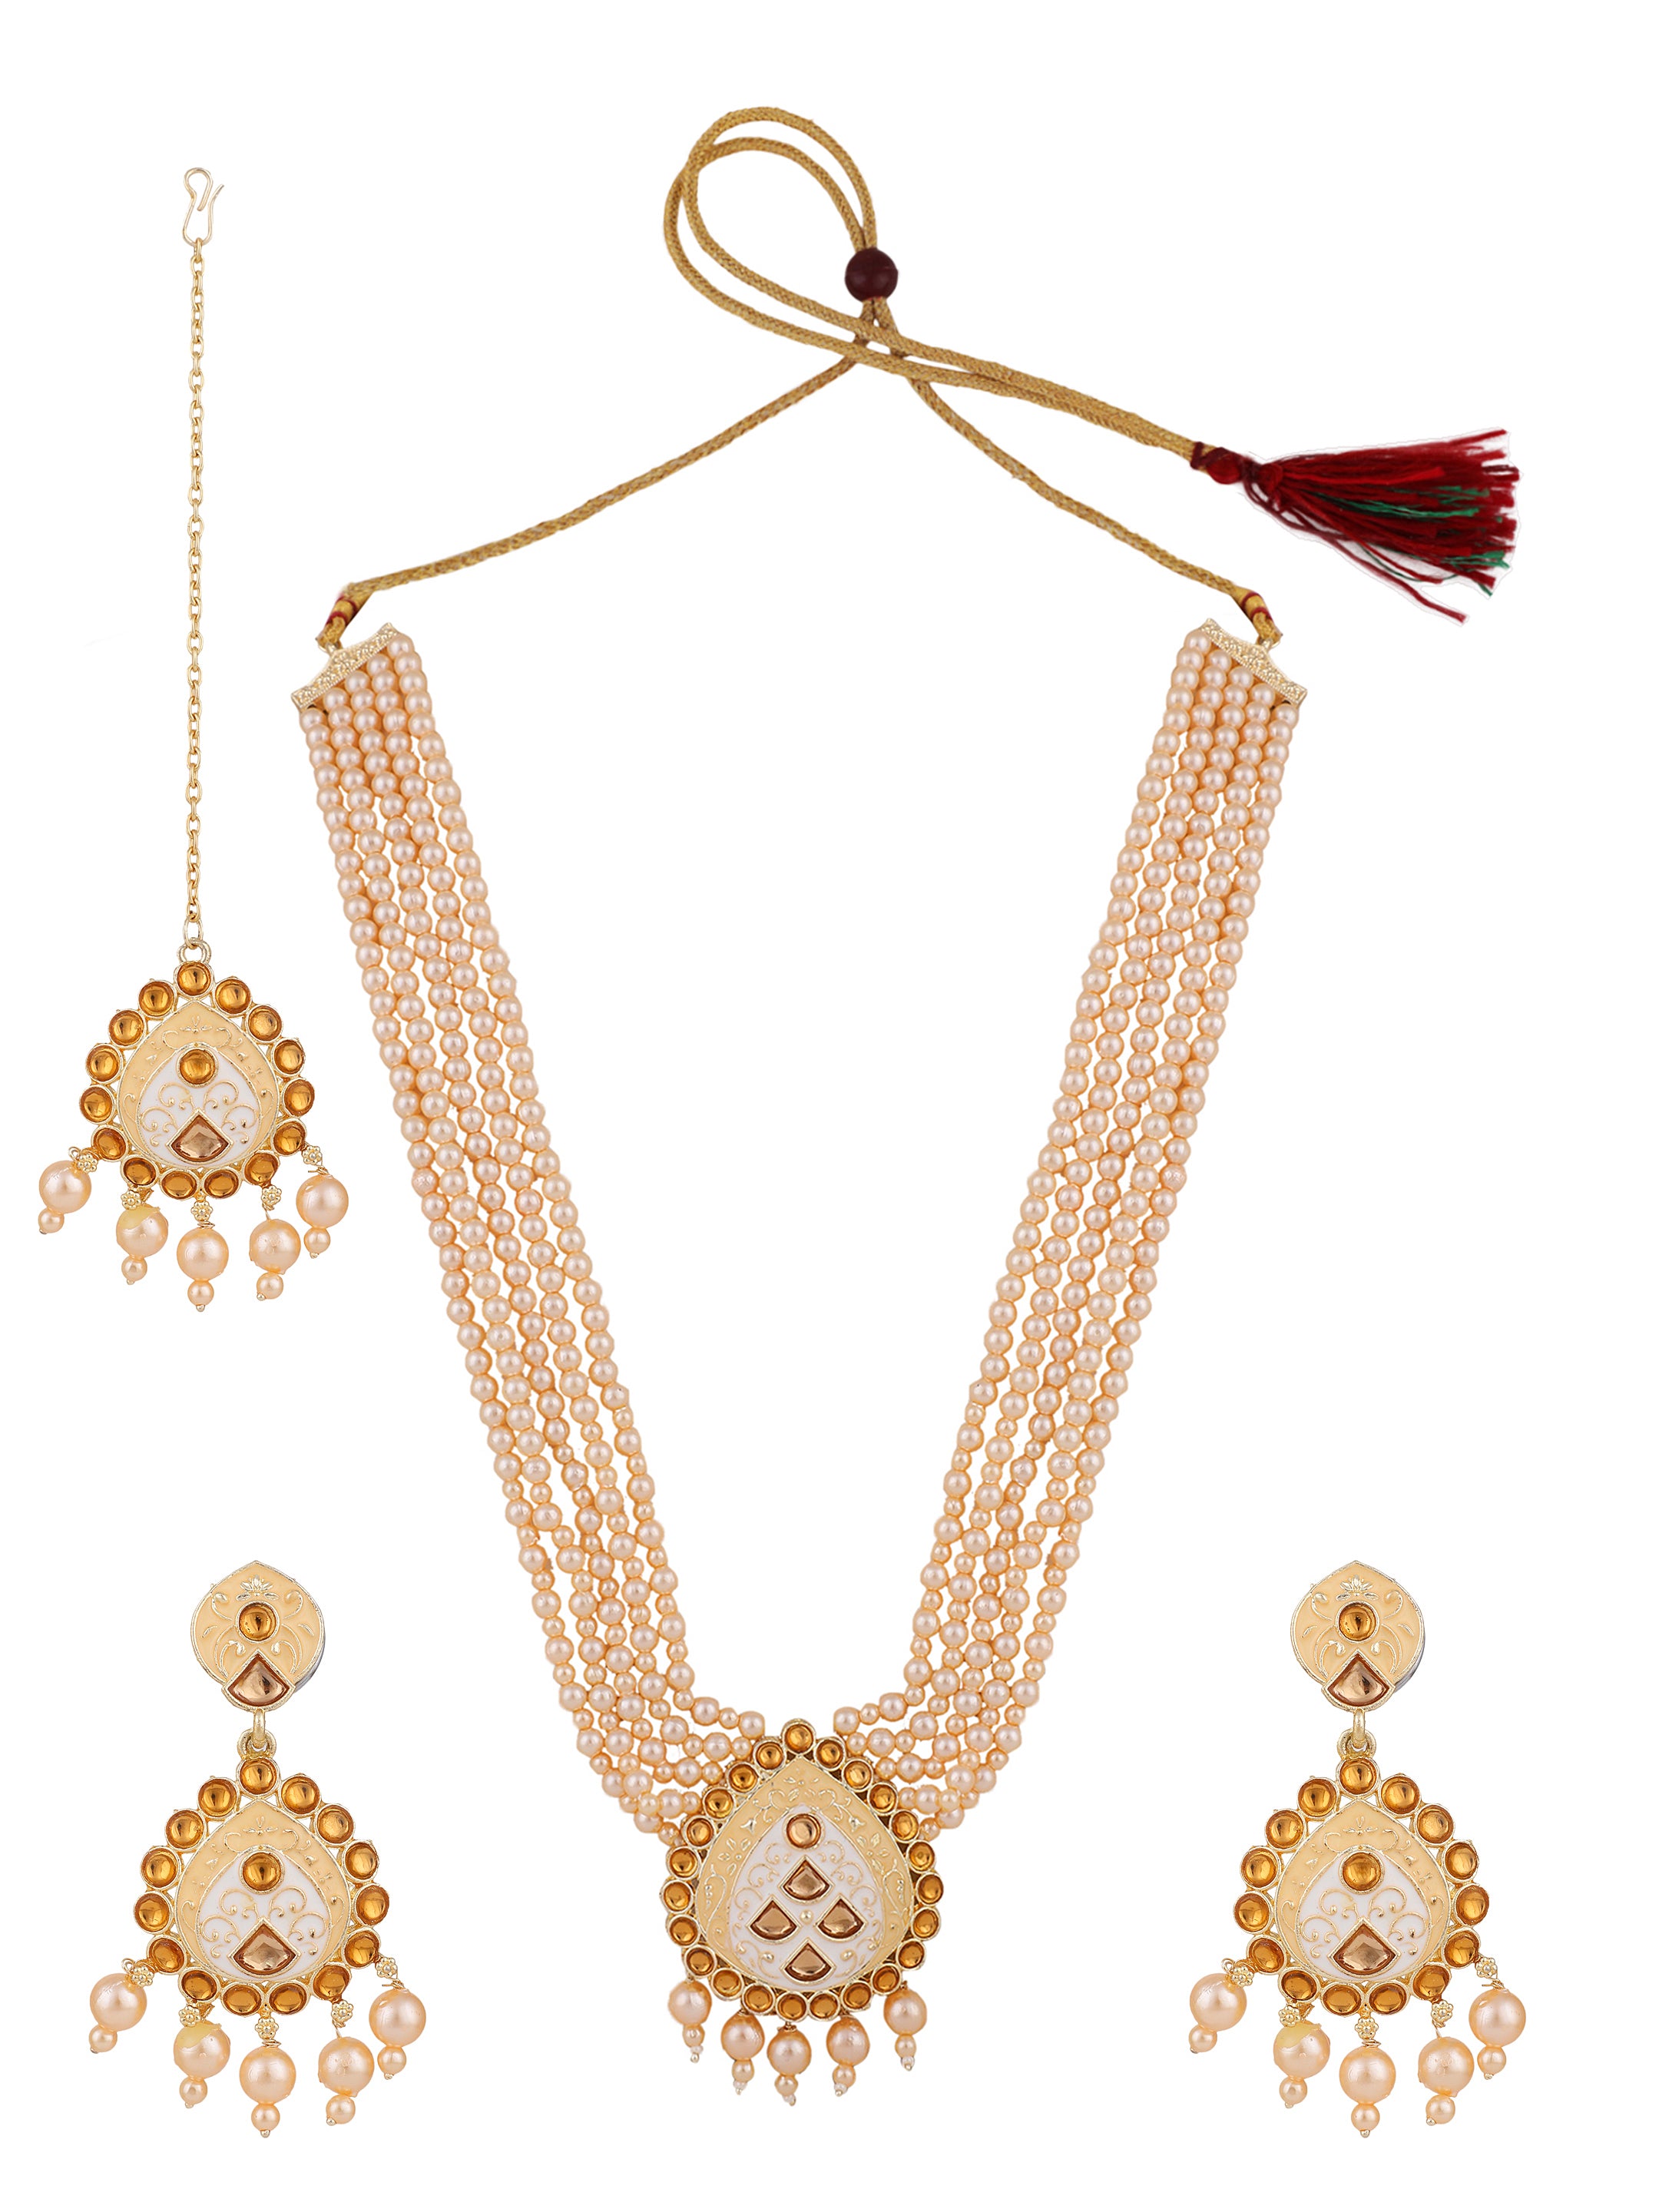 Women's Wedding Wear Gold Pearl Necklace Set With Maang Tikka  - Zaffre Collections